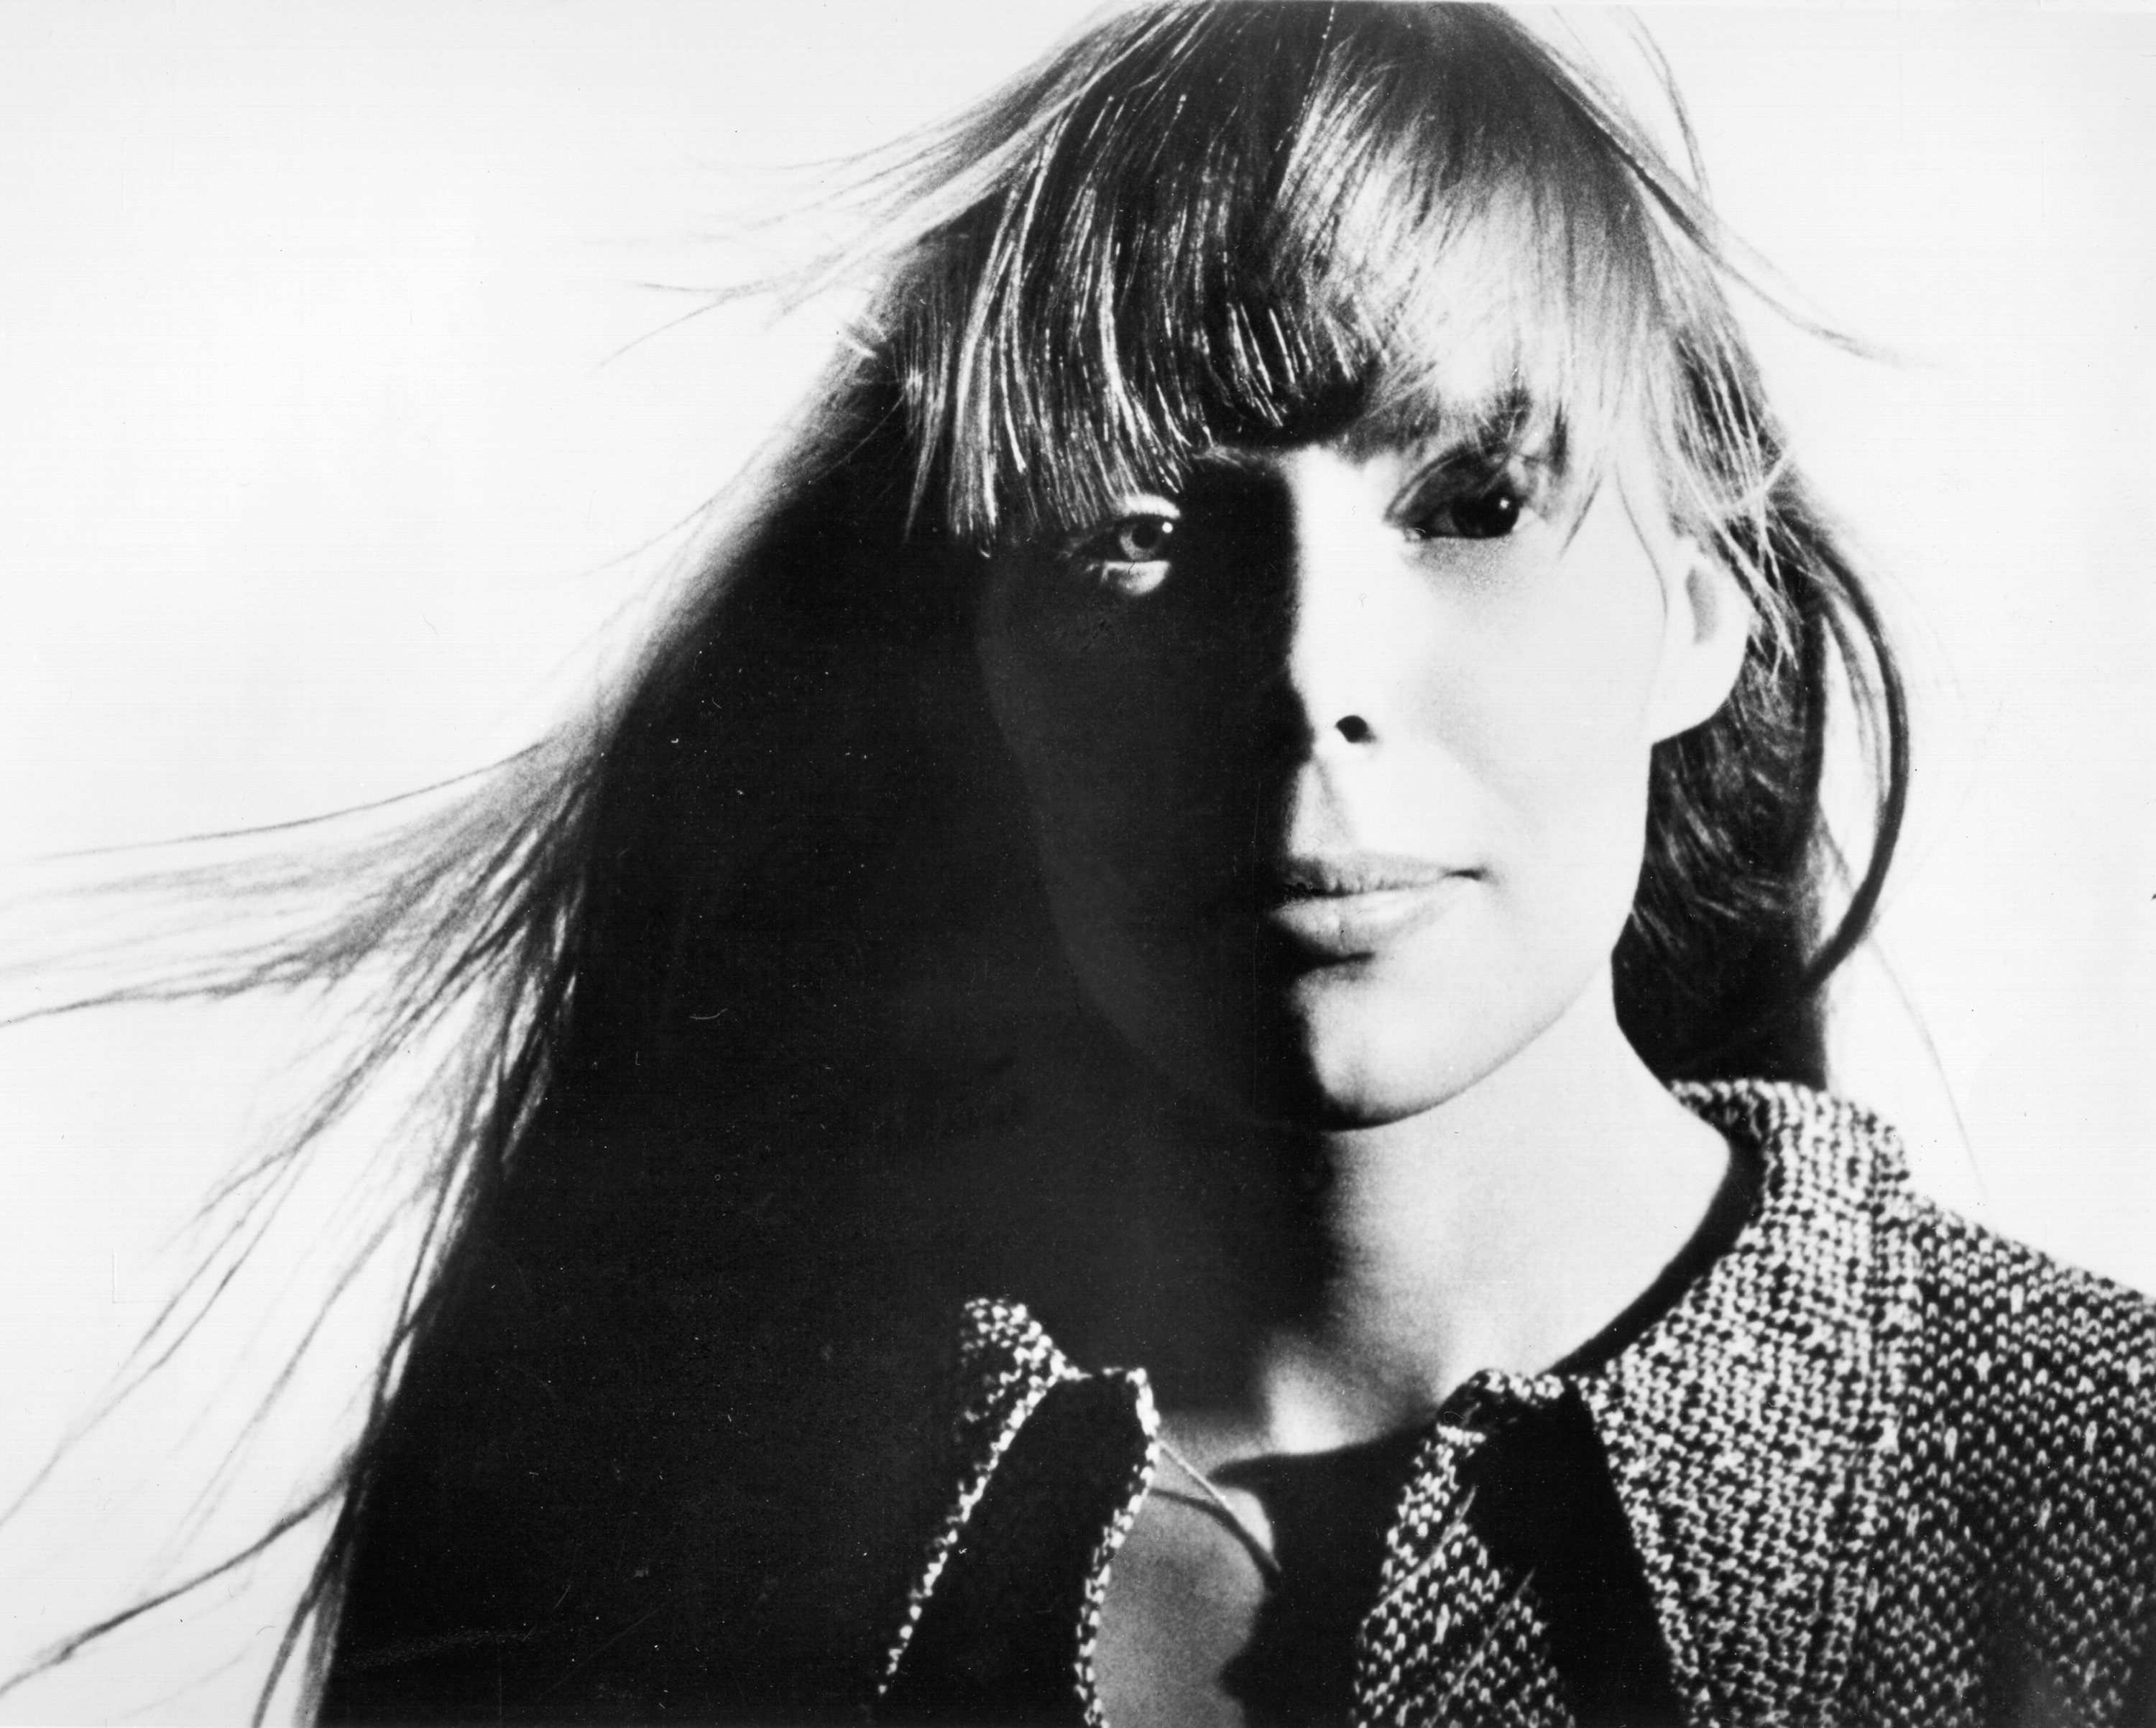 Joni Mitchell pictured with her hair blowing in the wind